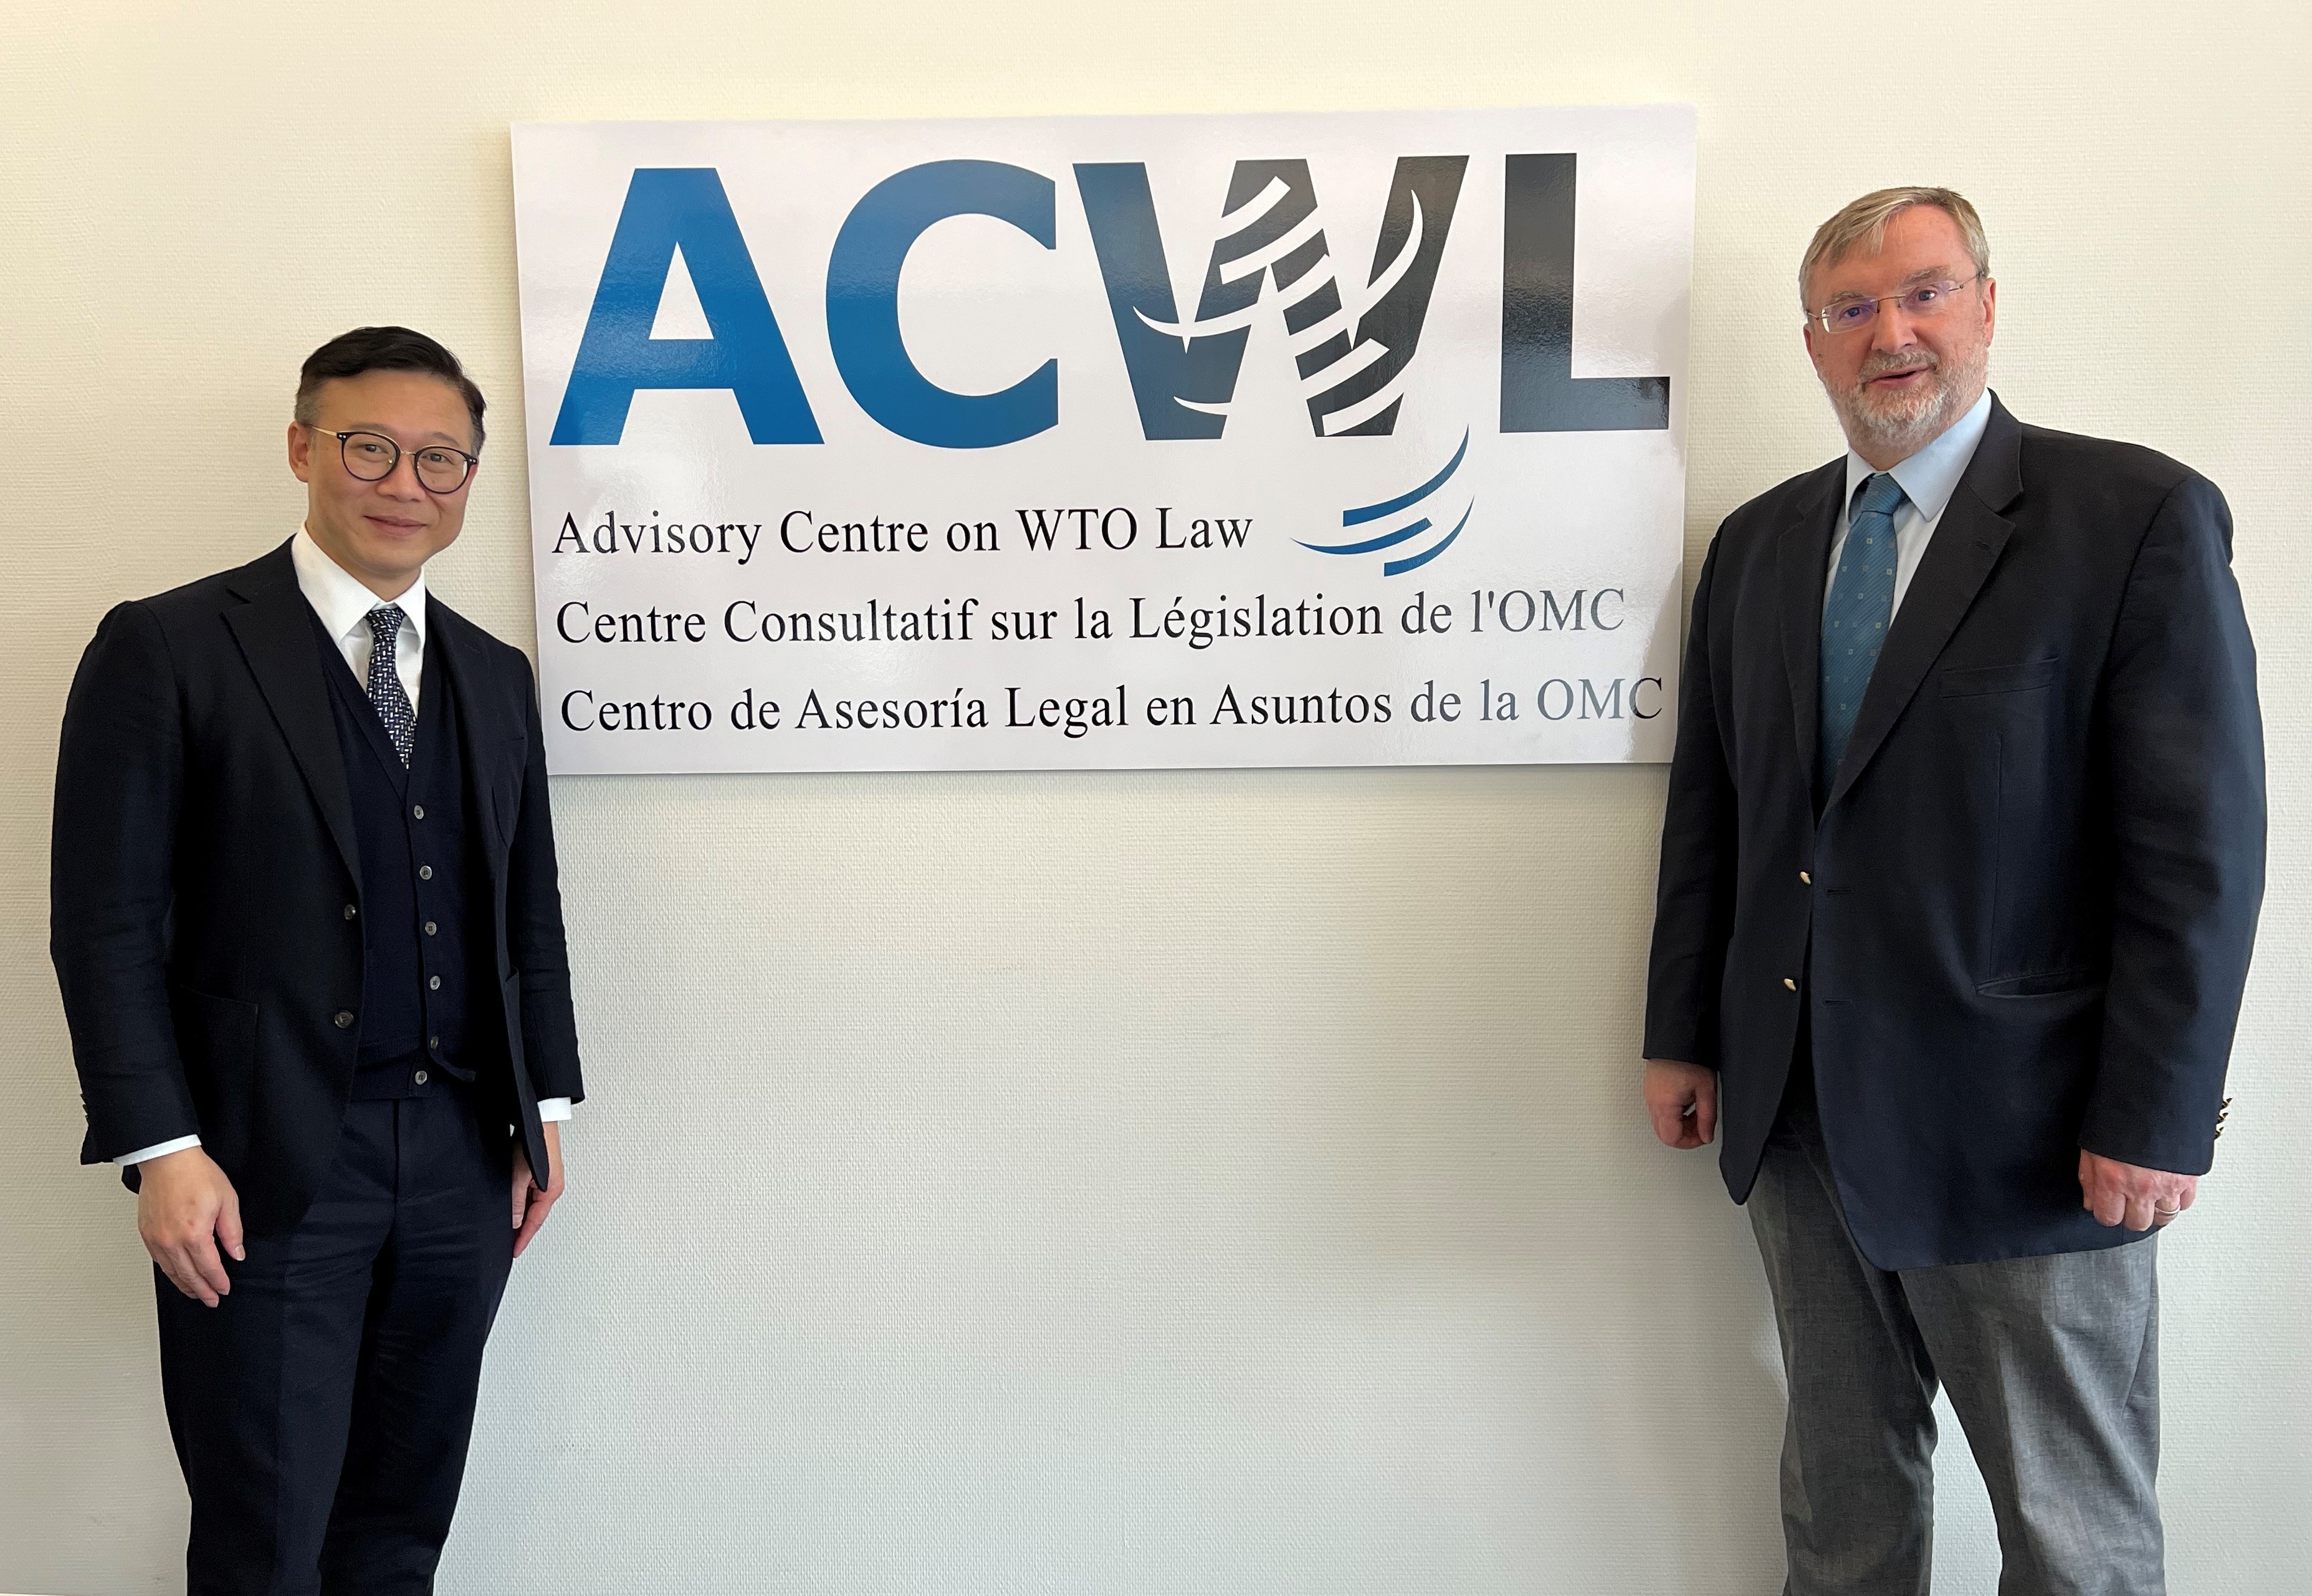 The Deputy Secretary for Justice, Mr Cheung Kwok-kwan (left), met with the Executive Director of the Advisory Centre on World Trade Organization Law, Mr Niall Meagher (right), in Geneva, Switzerland, on March 8 (Geneva time).